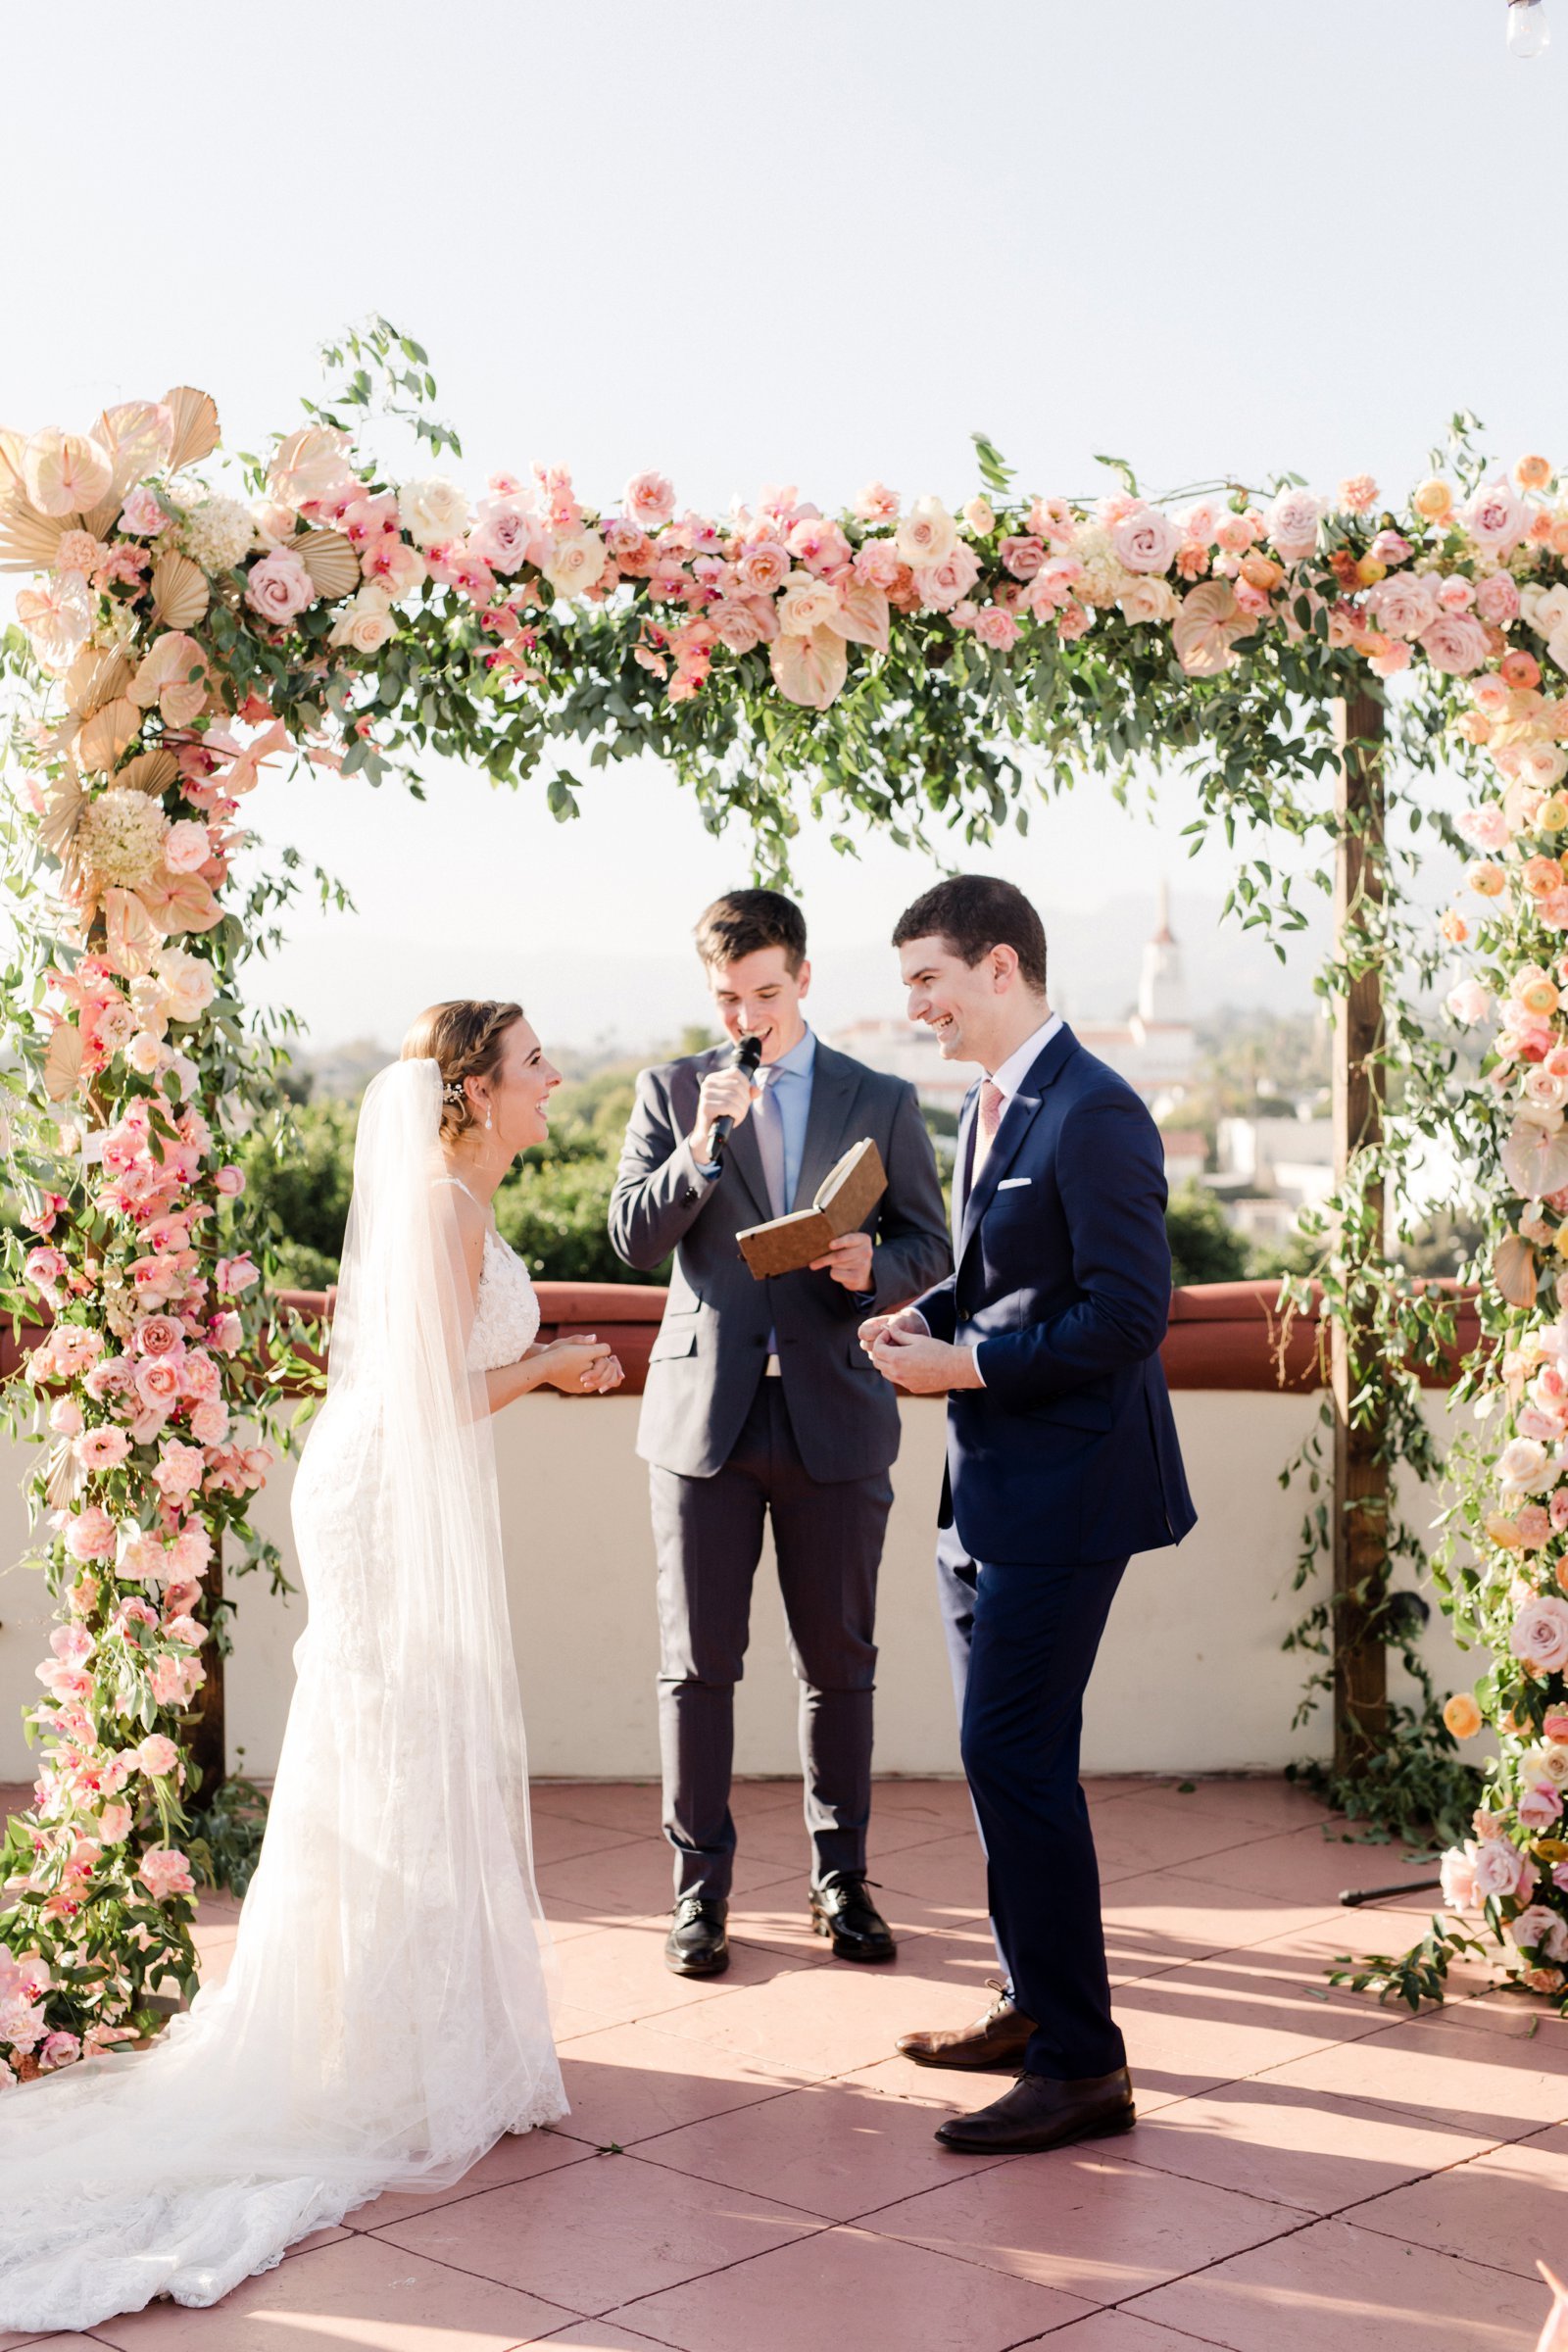 www.santabarbarawedding.com | Anna Delores Photography | Kimpton Canary Hotel | Onyx + Redwood | Idlewild Floral | Bride and Groom During Ceremony 